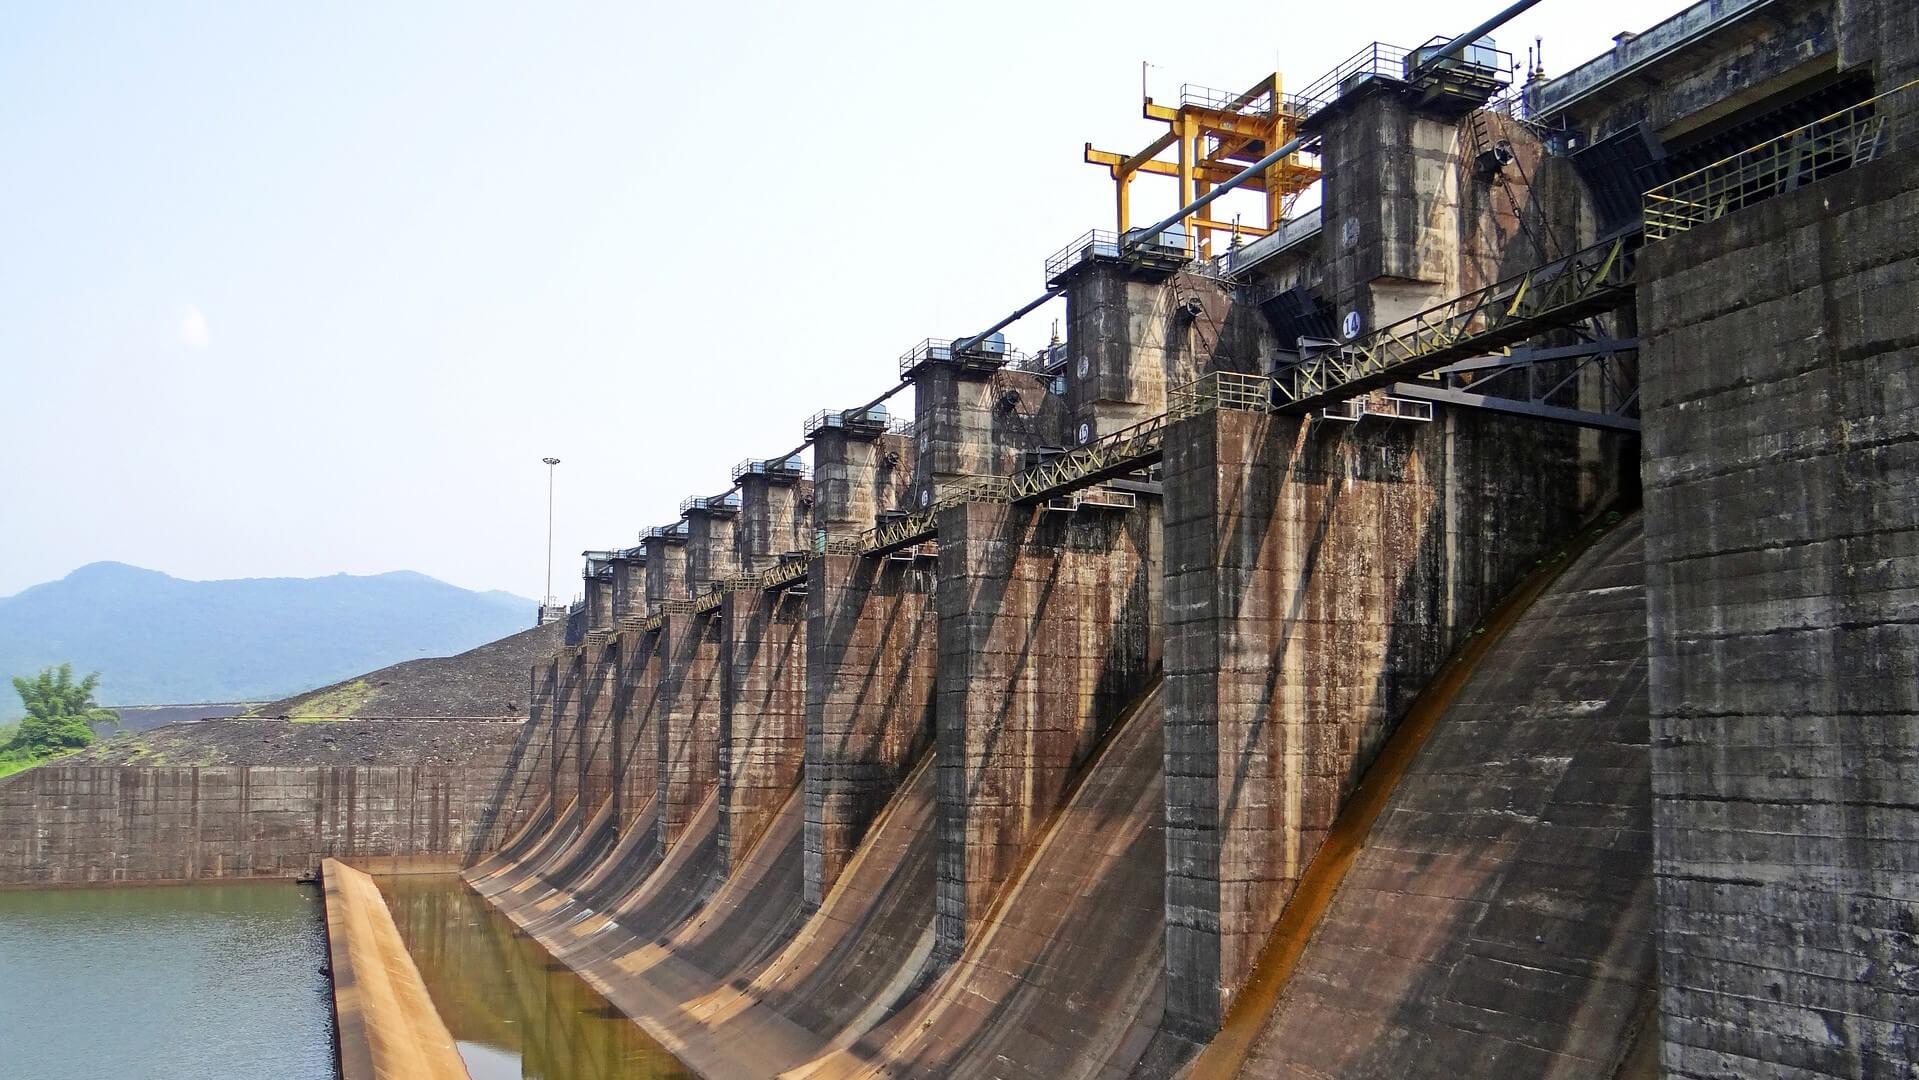 View along retaining wall of hydopower dam in India